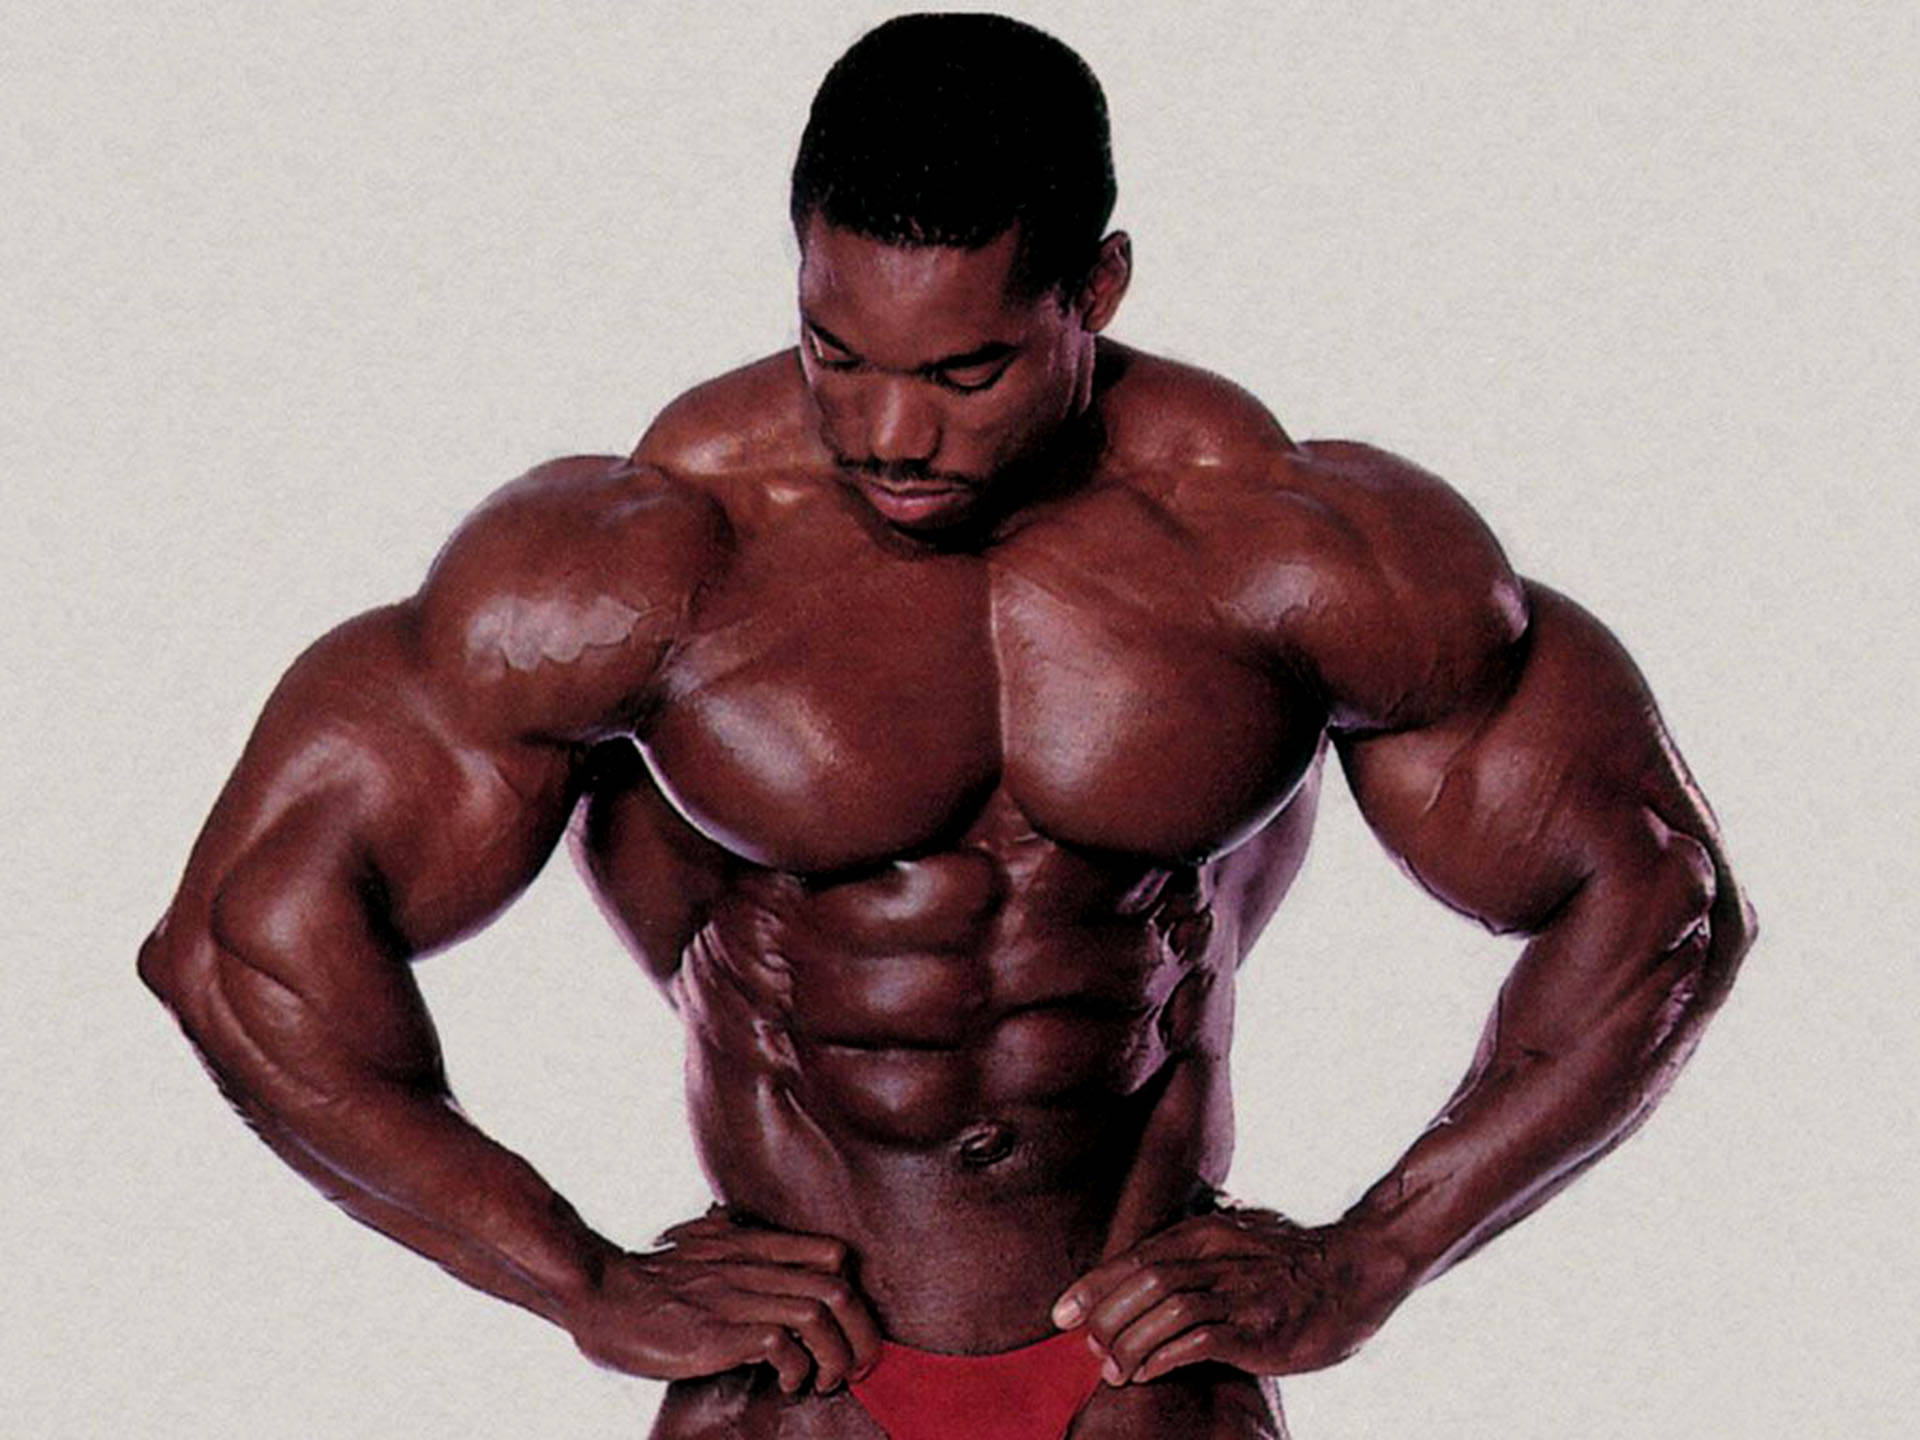 Flexwheeler Front Lat Spread Can Be Translated To Spanish As 